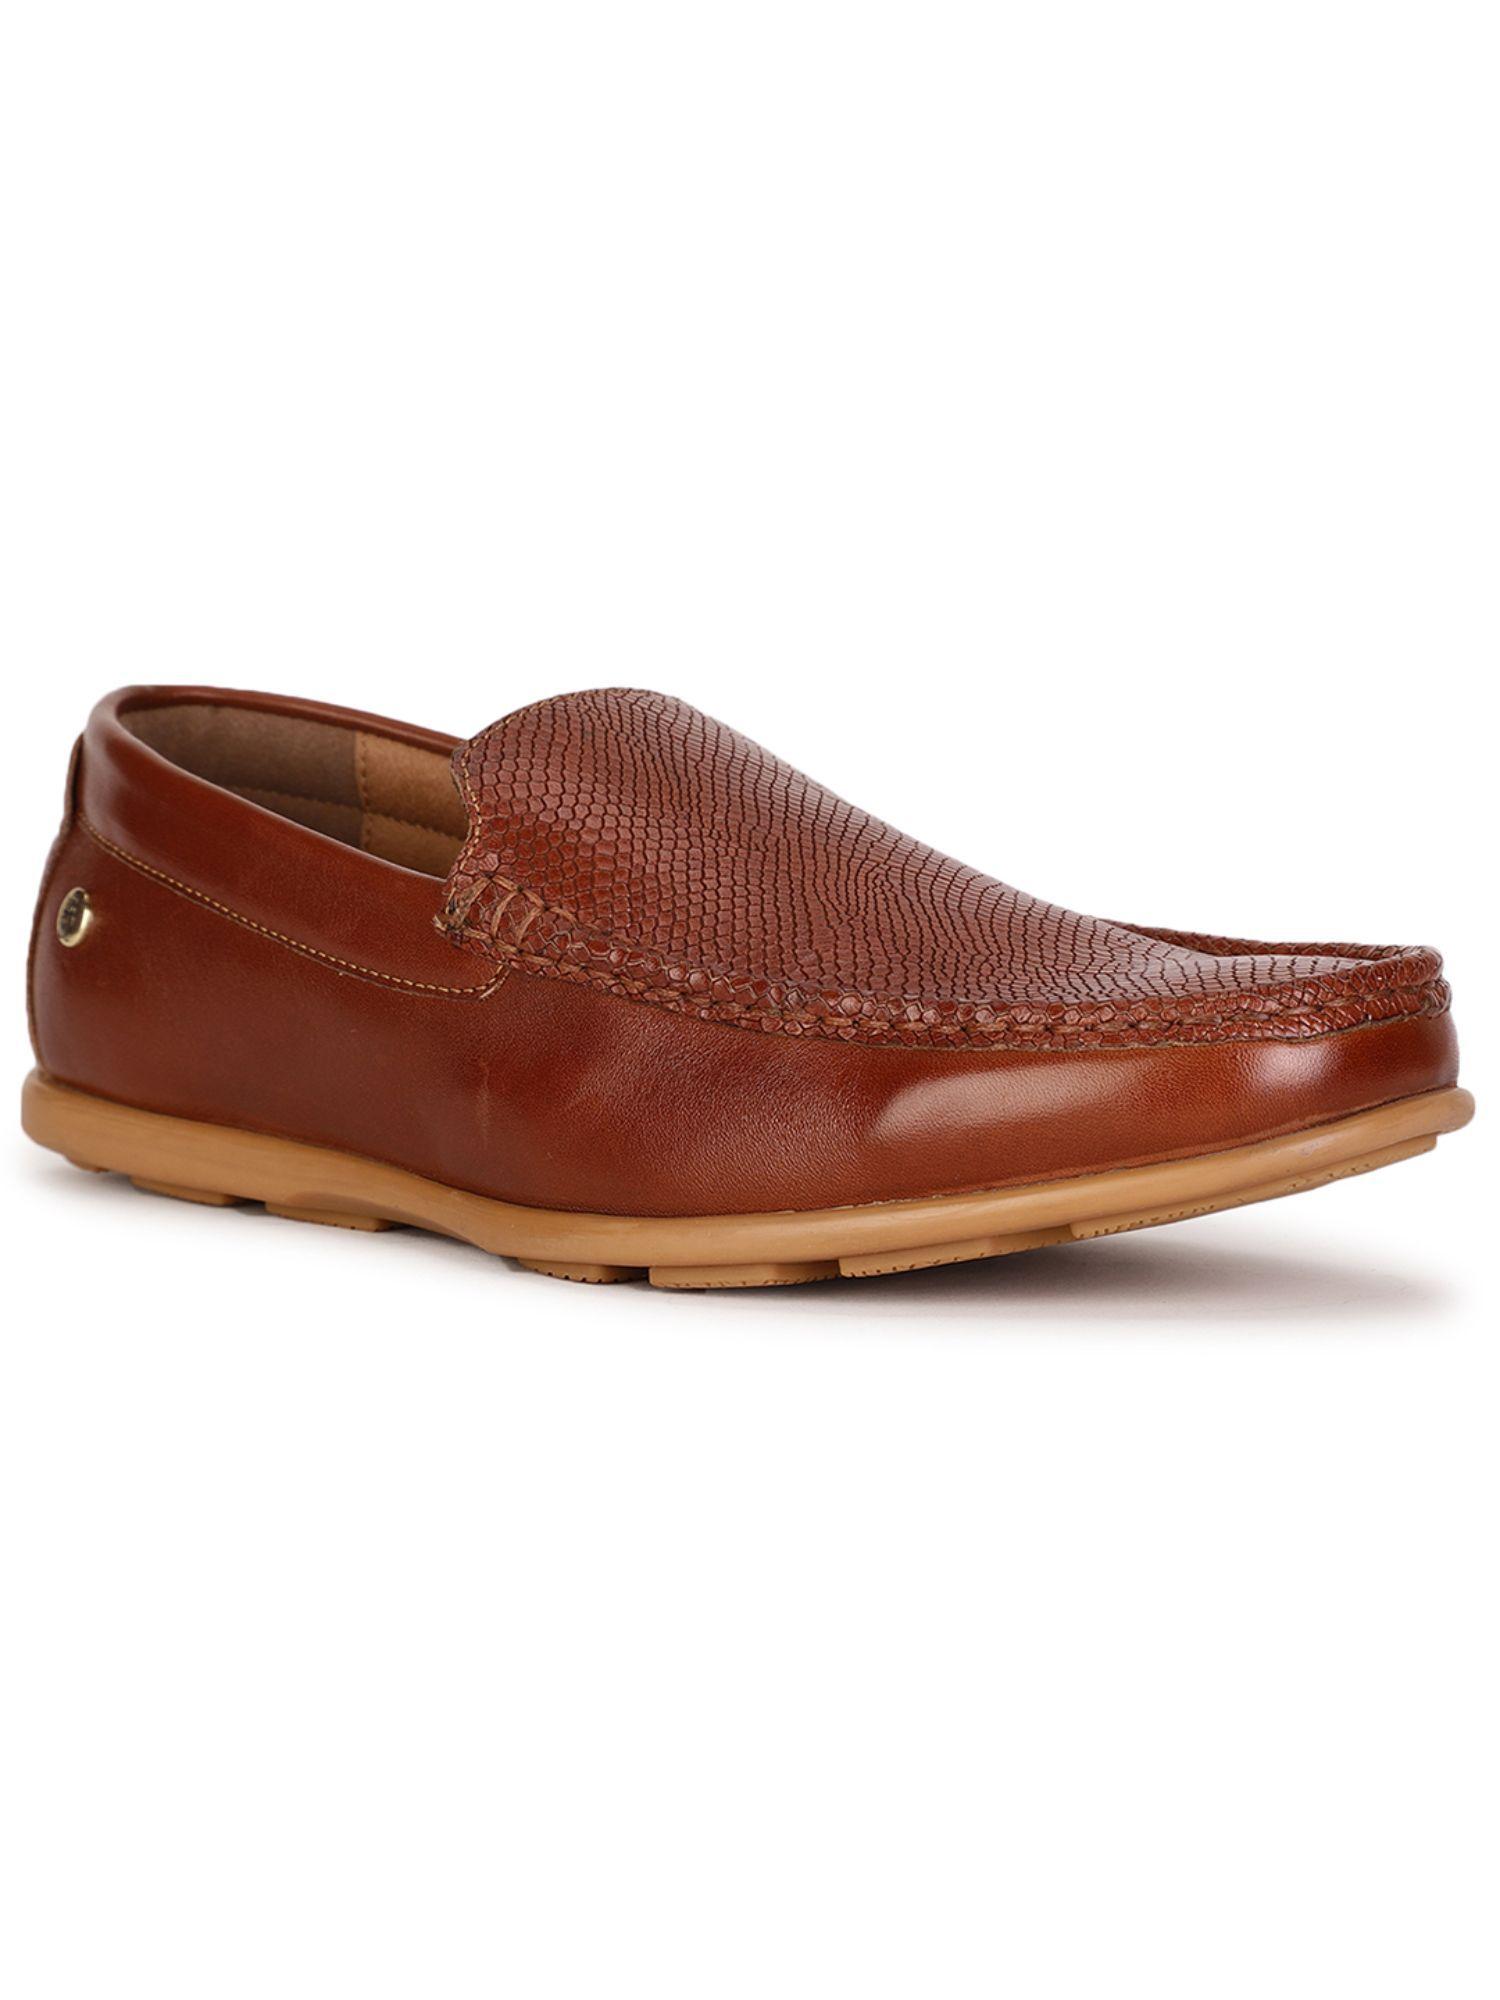 mens-brown-slip-on-casual-loafers